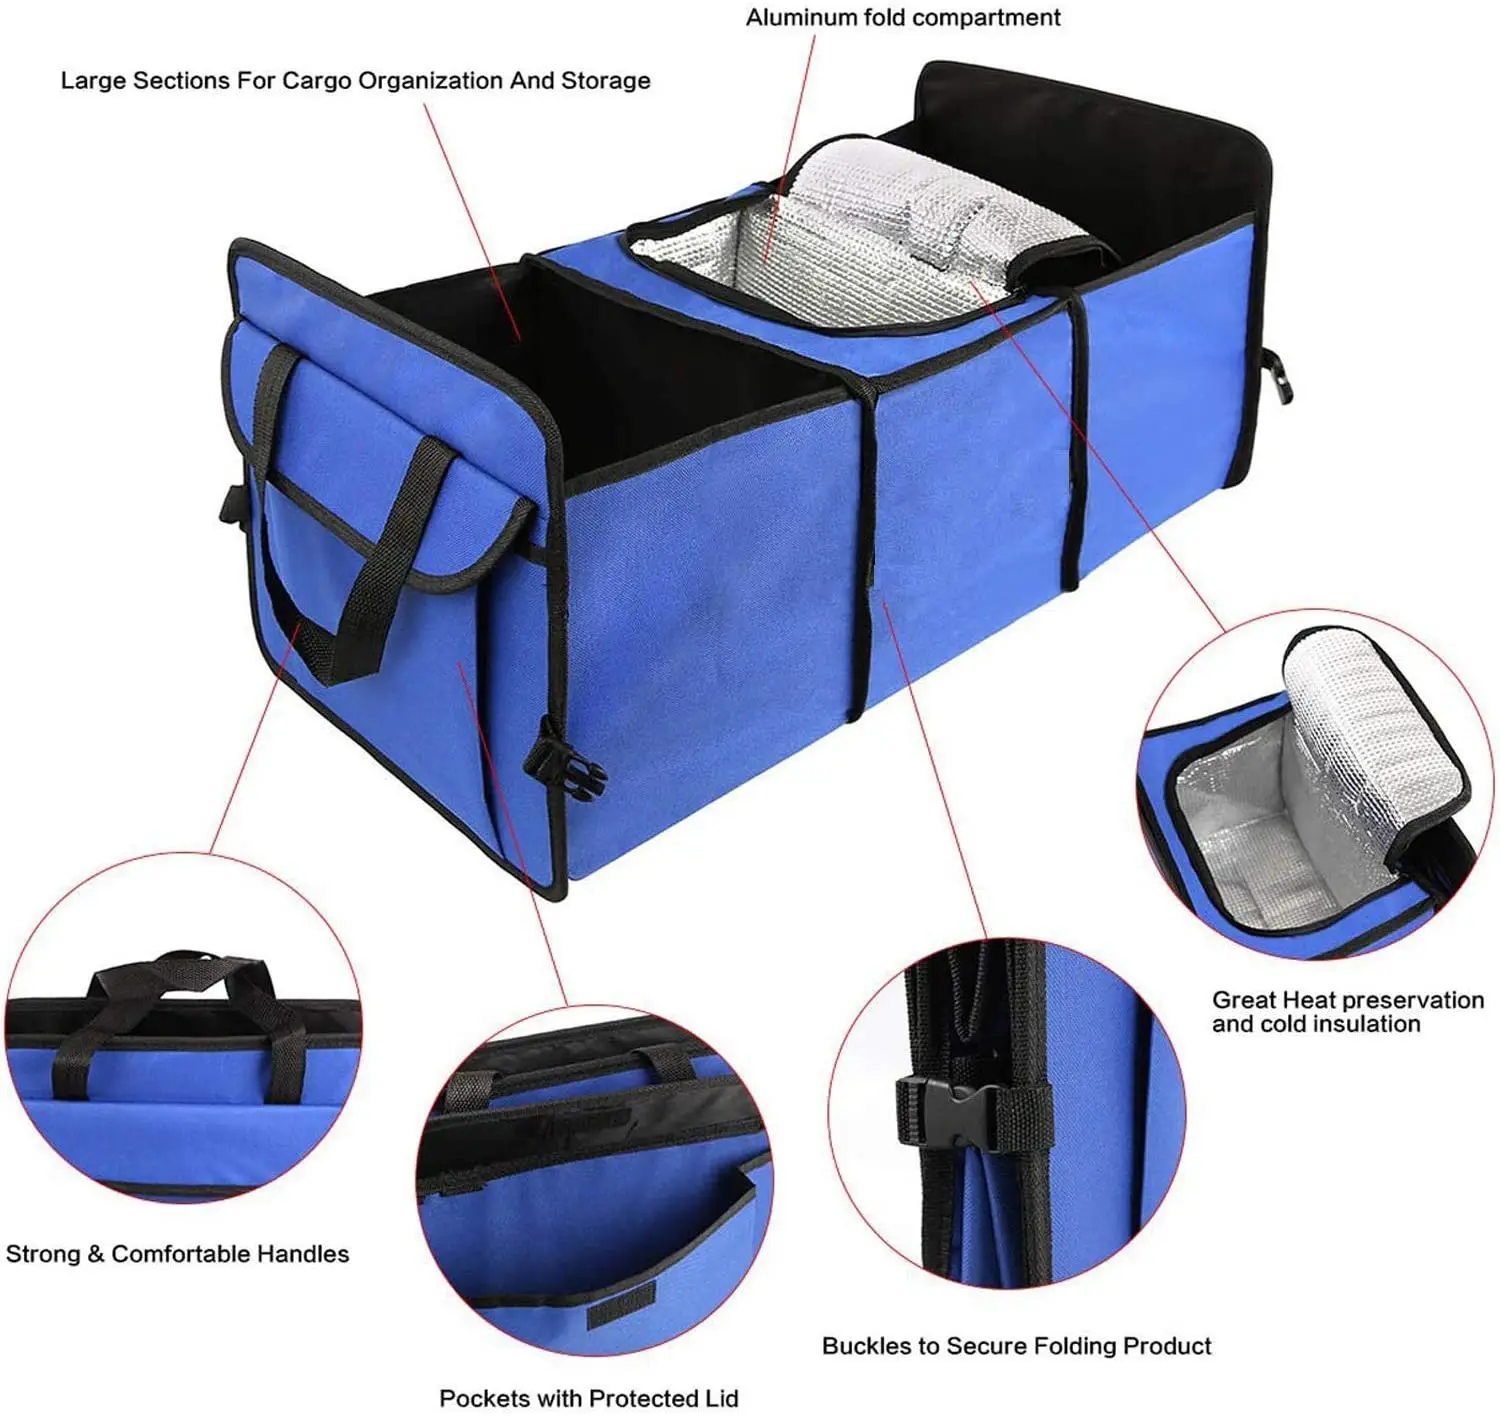 Car Trunk Organizer with Cooler Bag for Hot/Cold Food While Traveling Shopping Camping, Collapsible Auto Trunk Storage Box